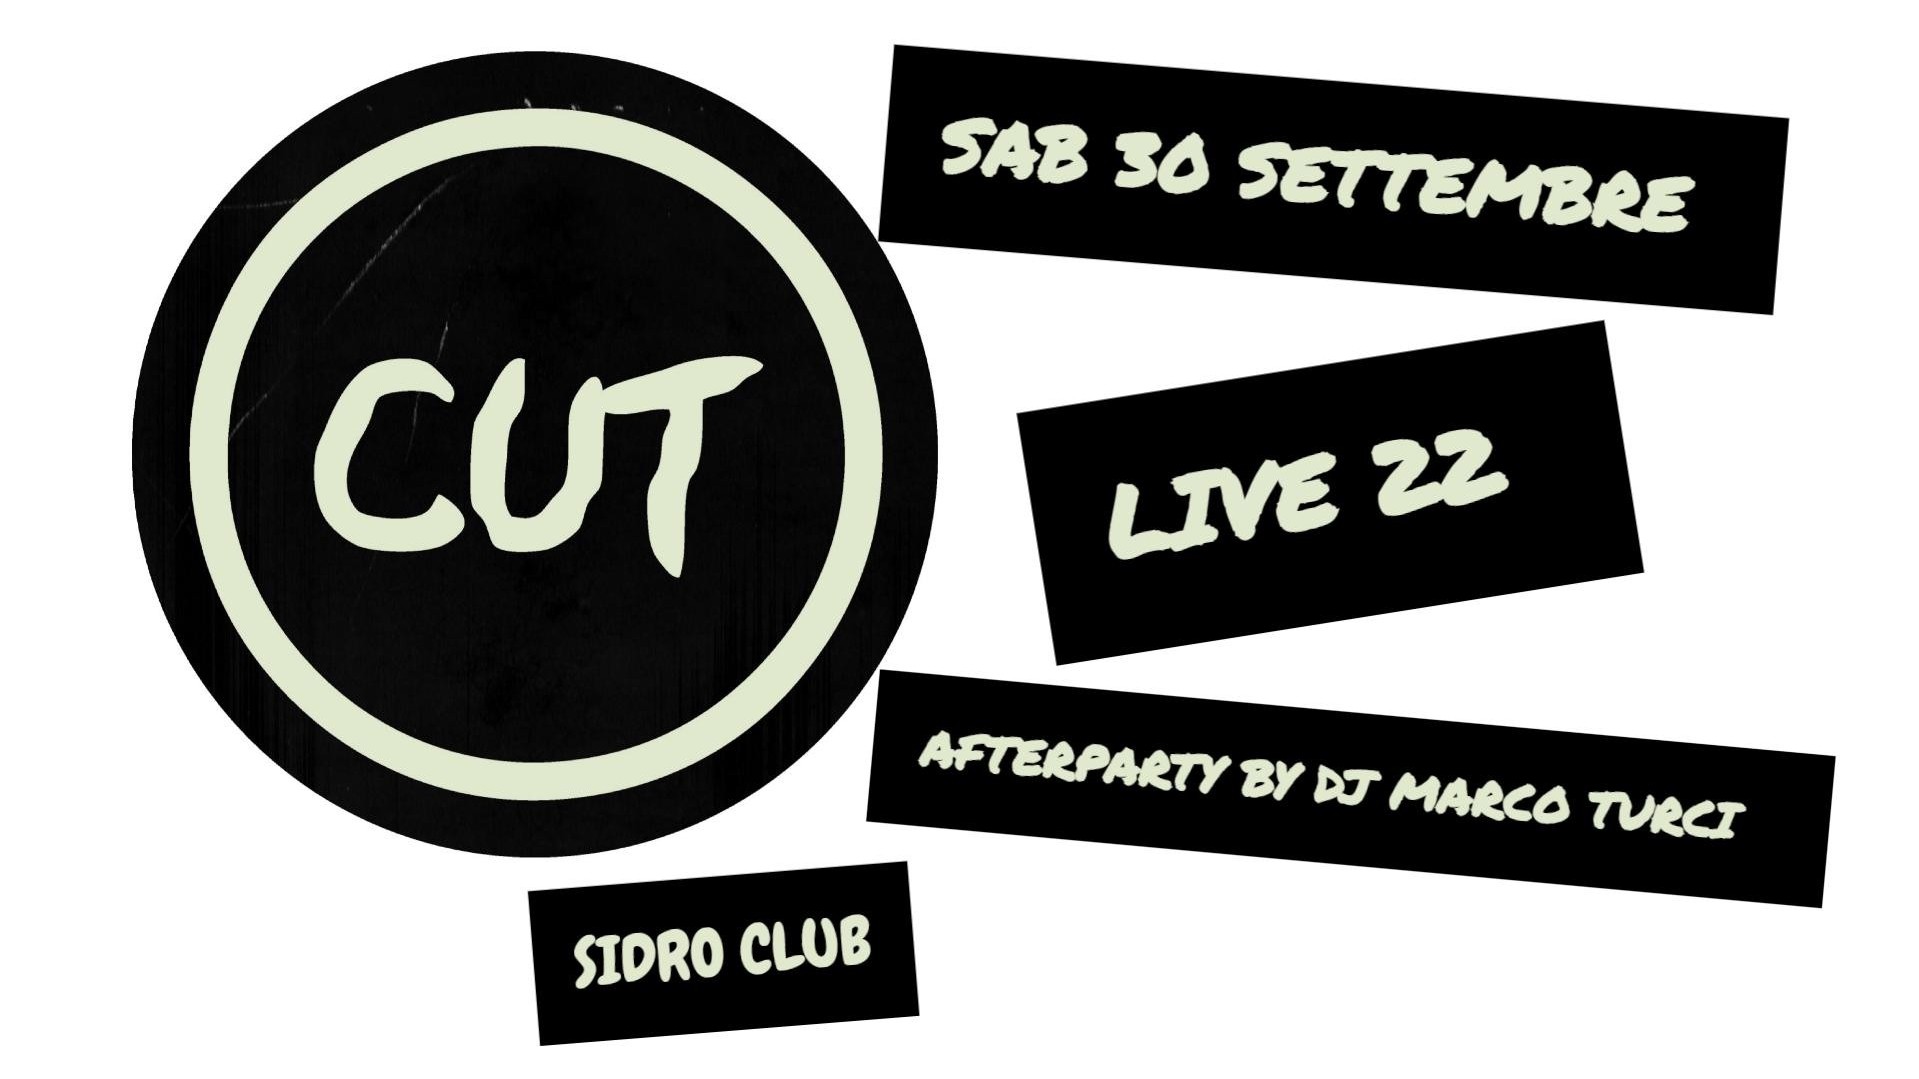 Cut - Afterparty By Dj Marco Turci